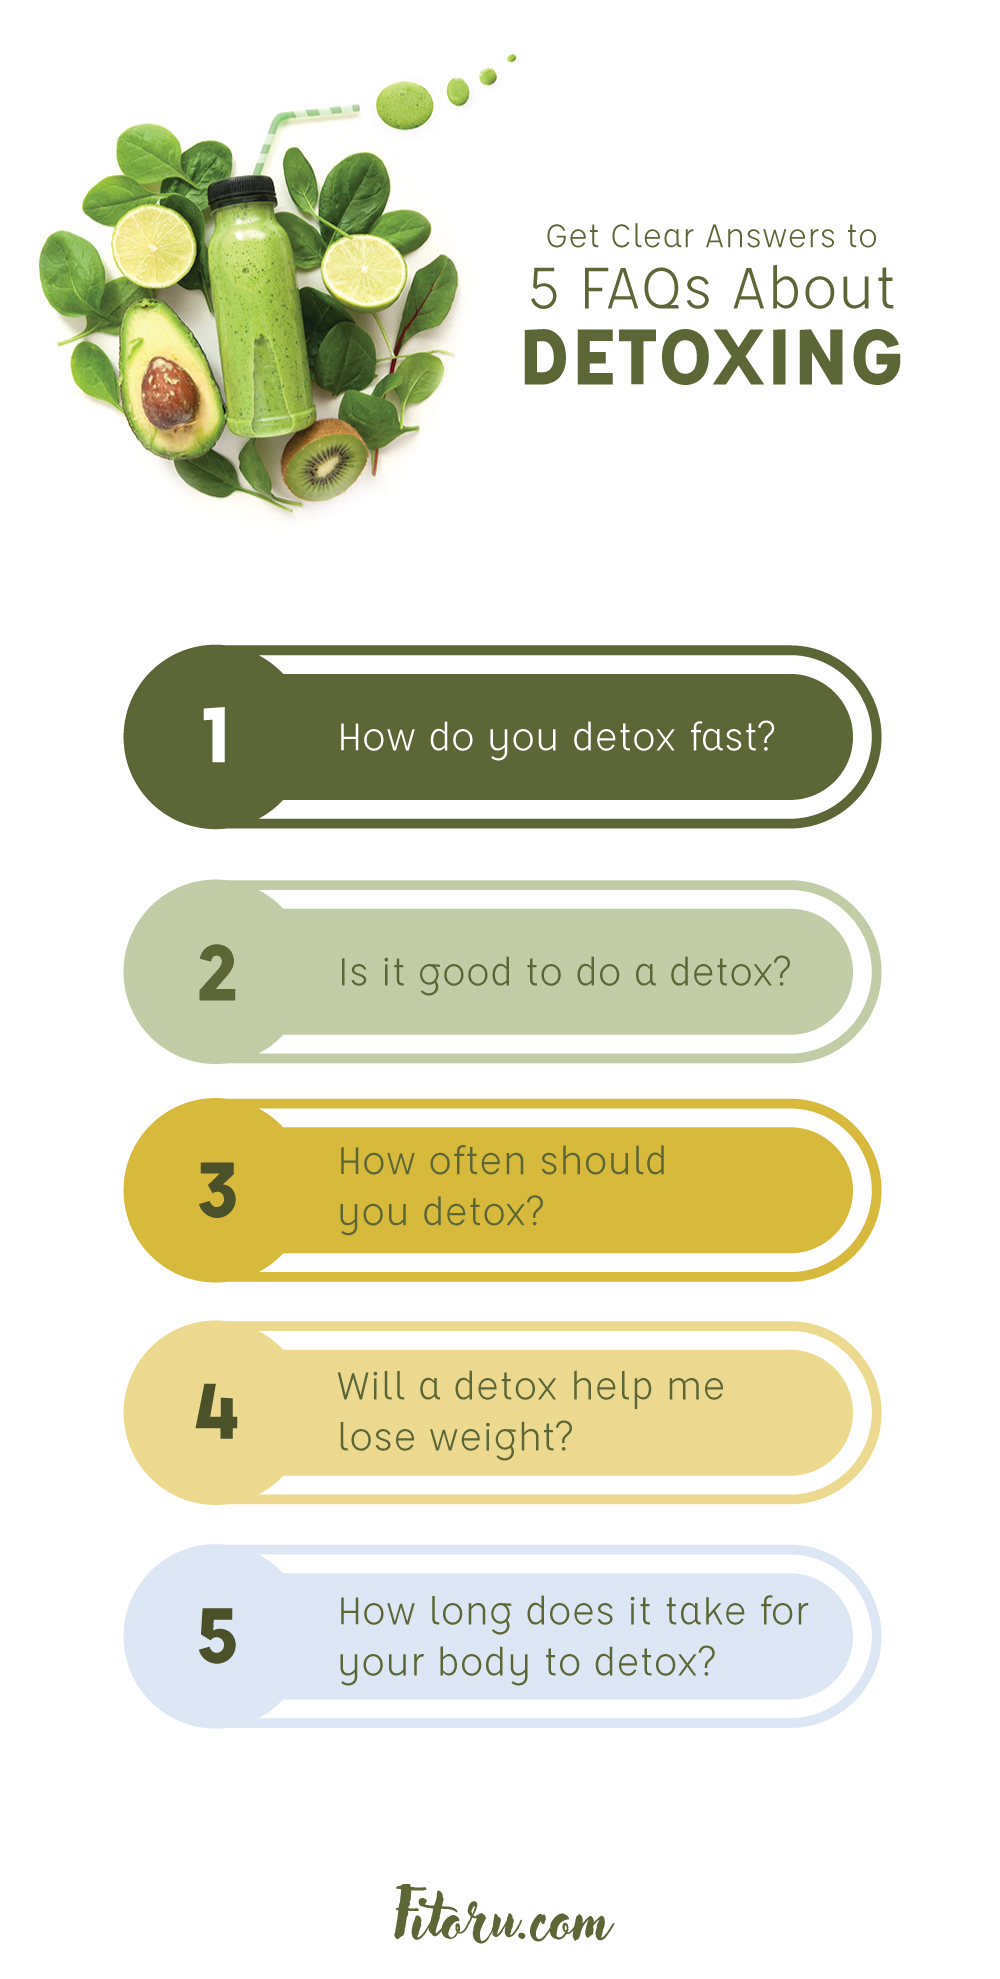 Get answers to 5 FAQs about detoxing.